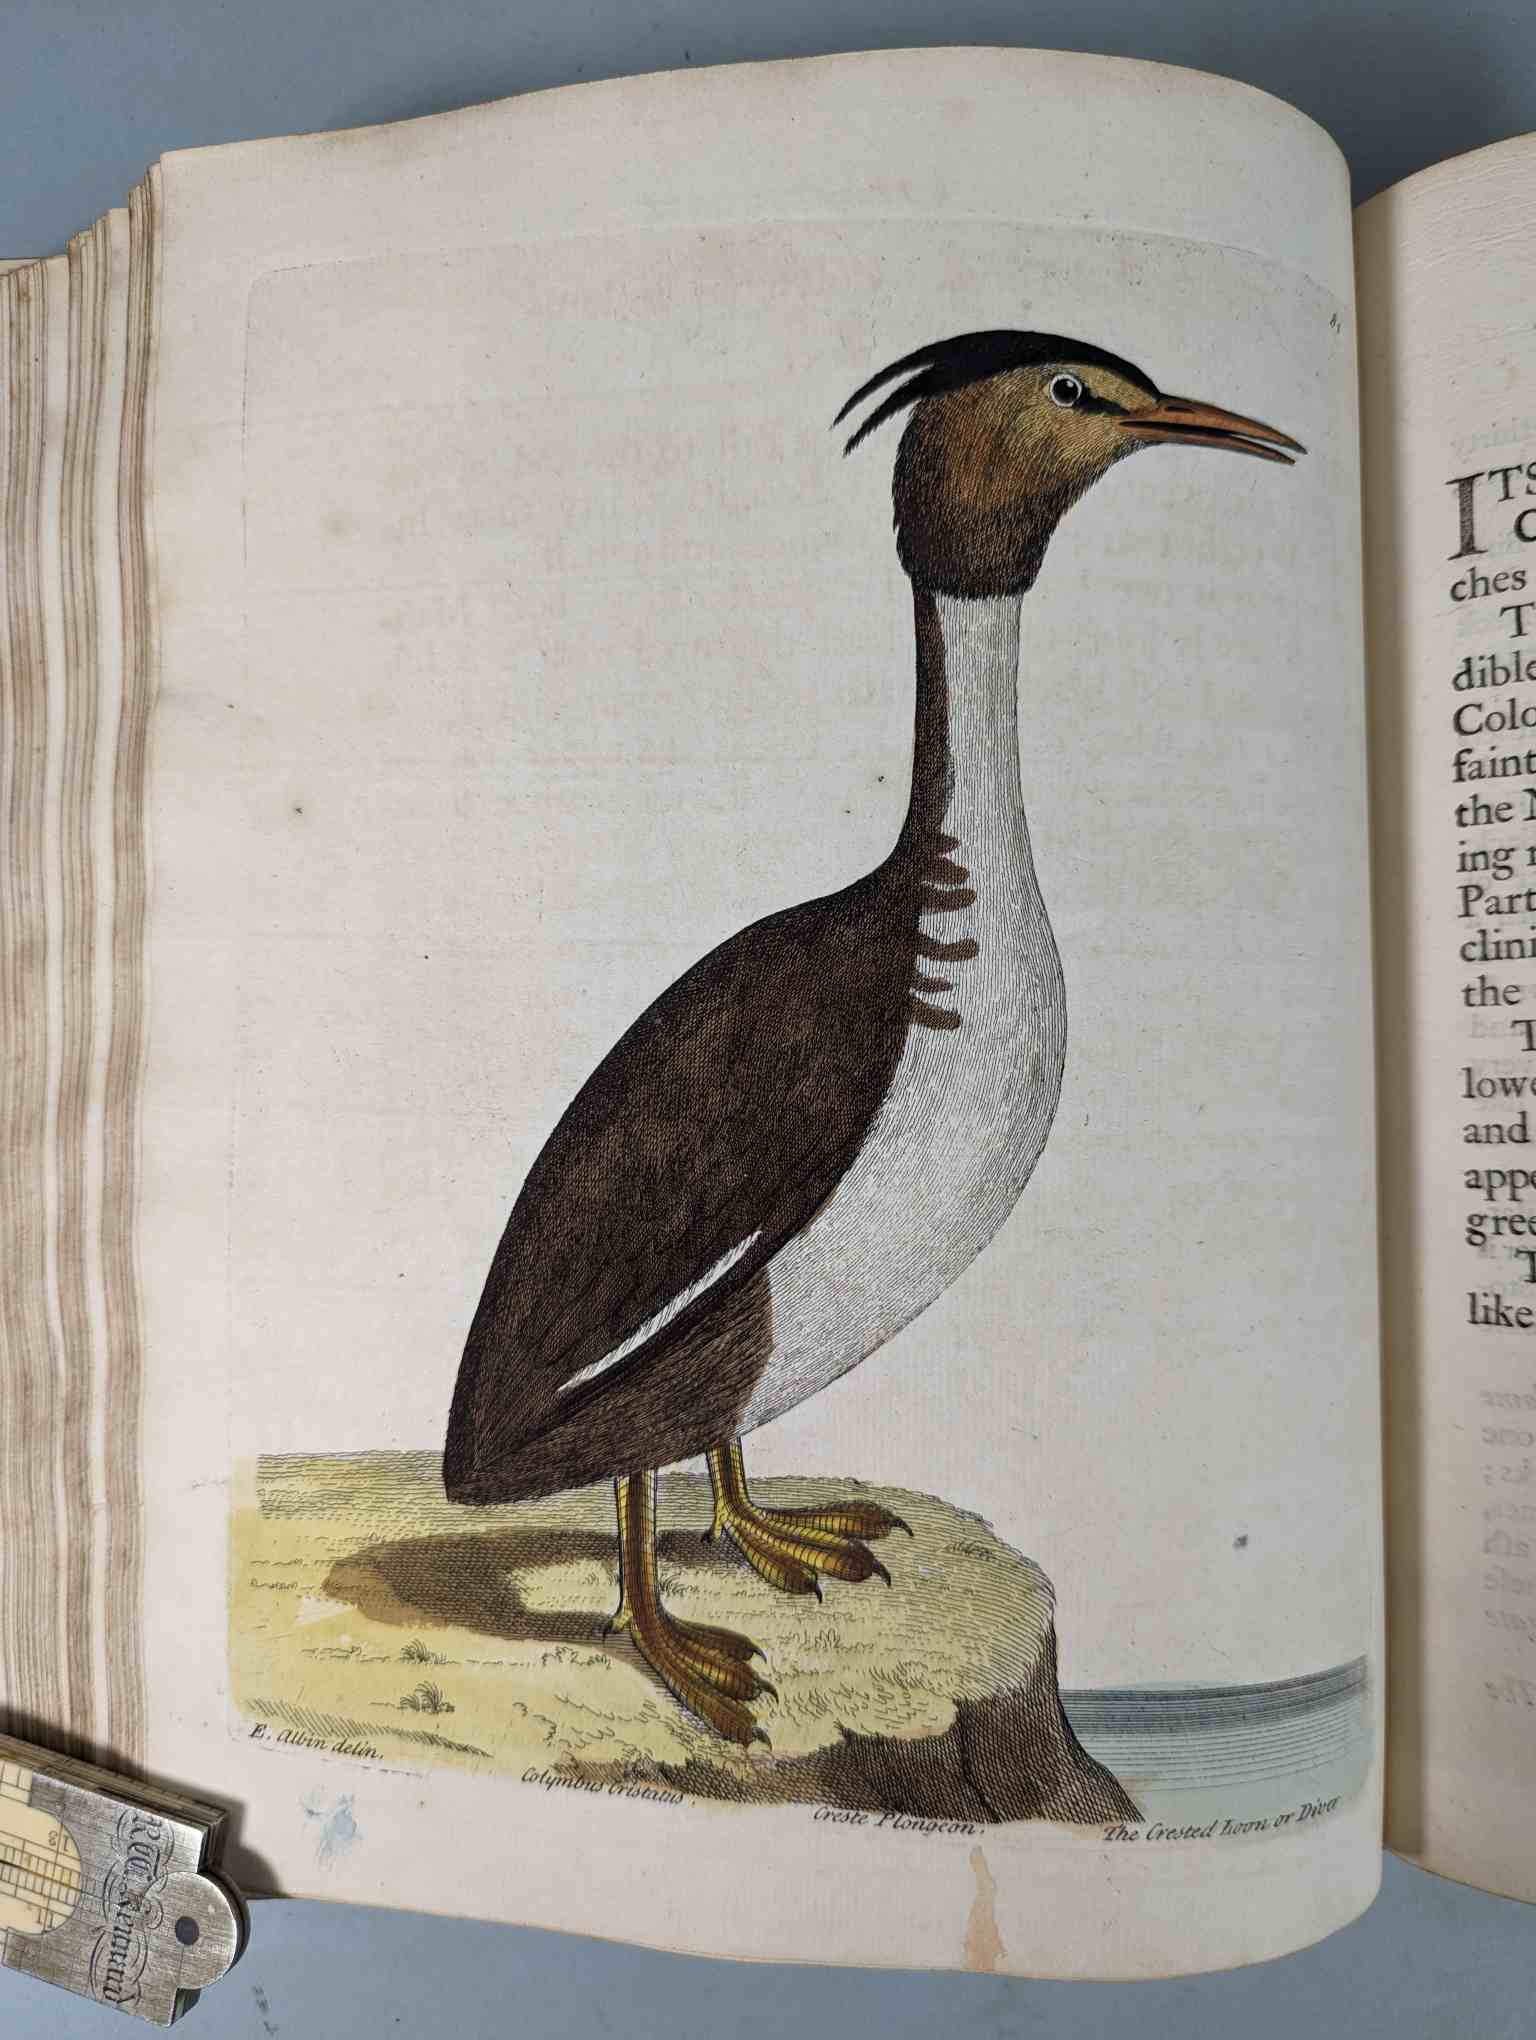 ALBIN, Eleazar. A Natural History of Birds, to which are added, Notes and Observations by W. - Image 84 of 208